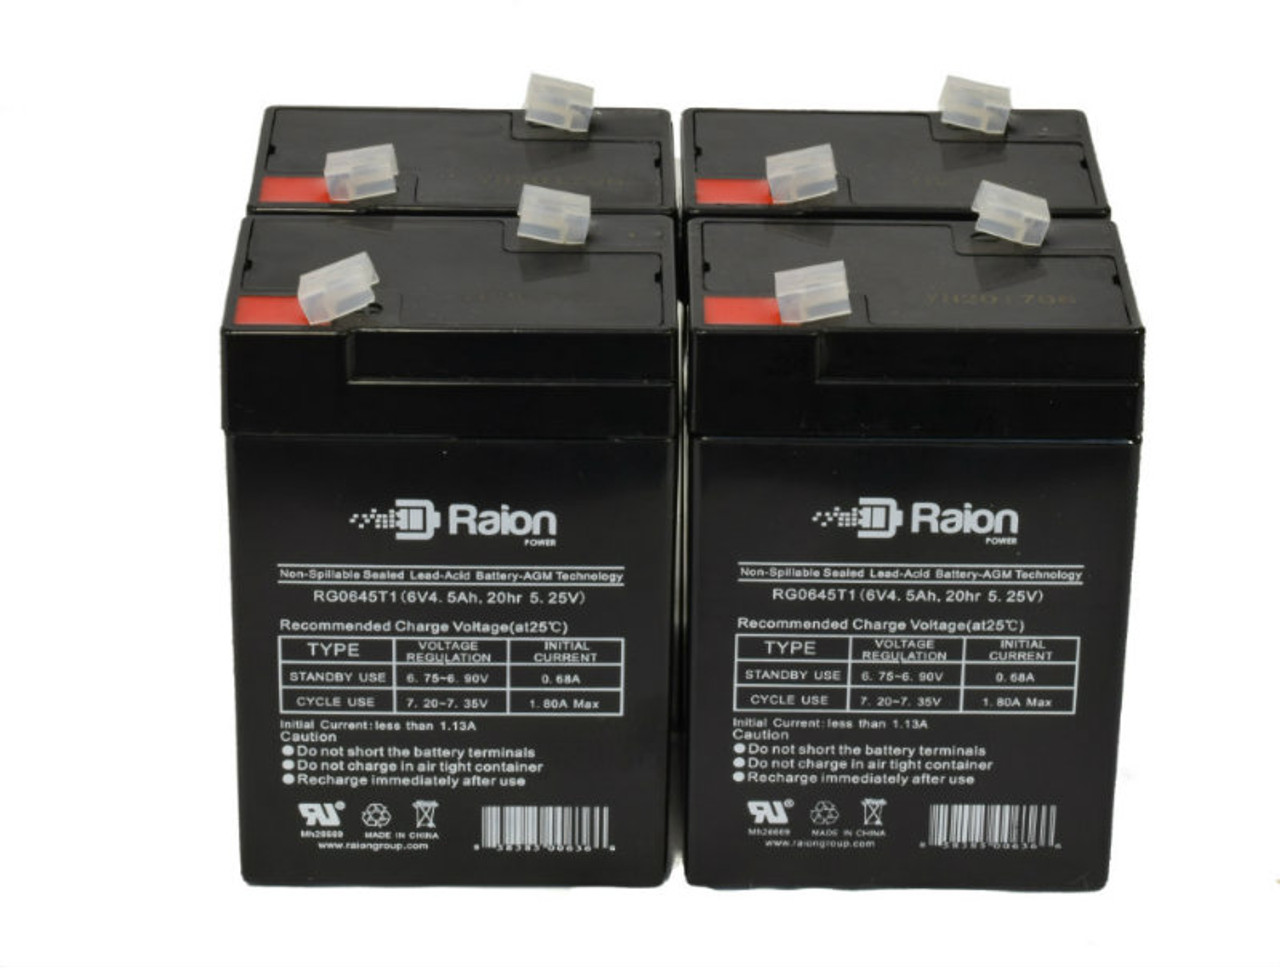 Raion Power 6V 4.5Ah Replacement Emergency Light Battery for Siltron SN640 - 4 Pack